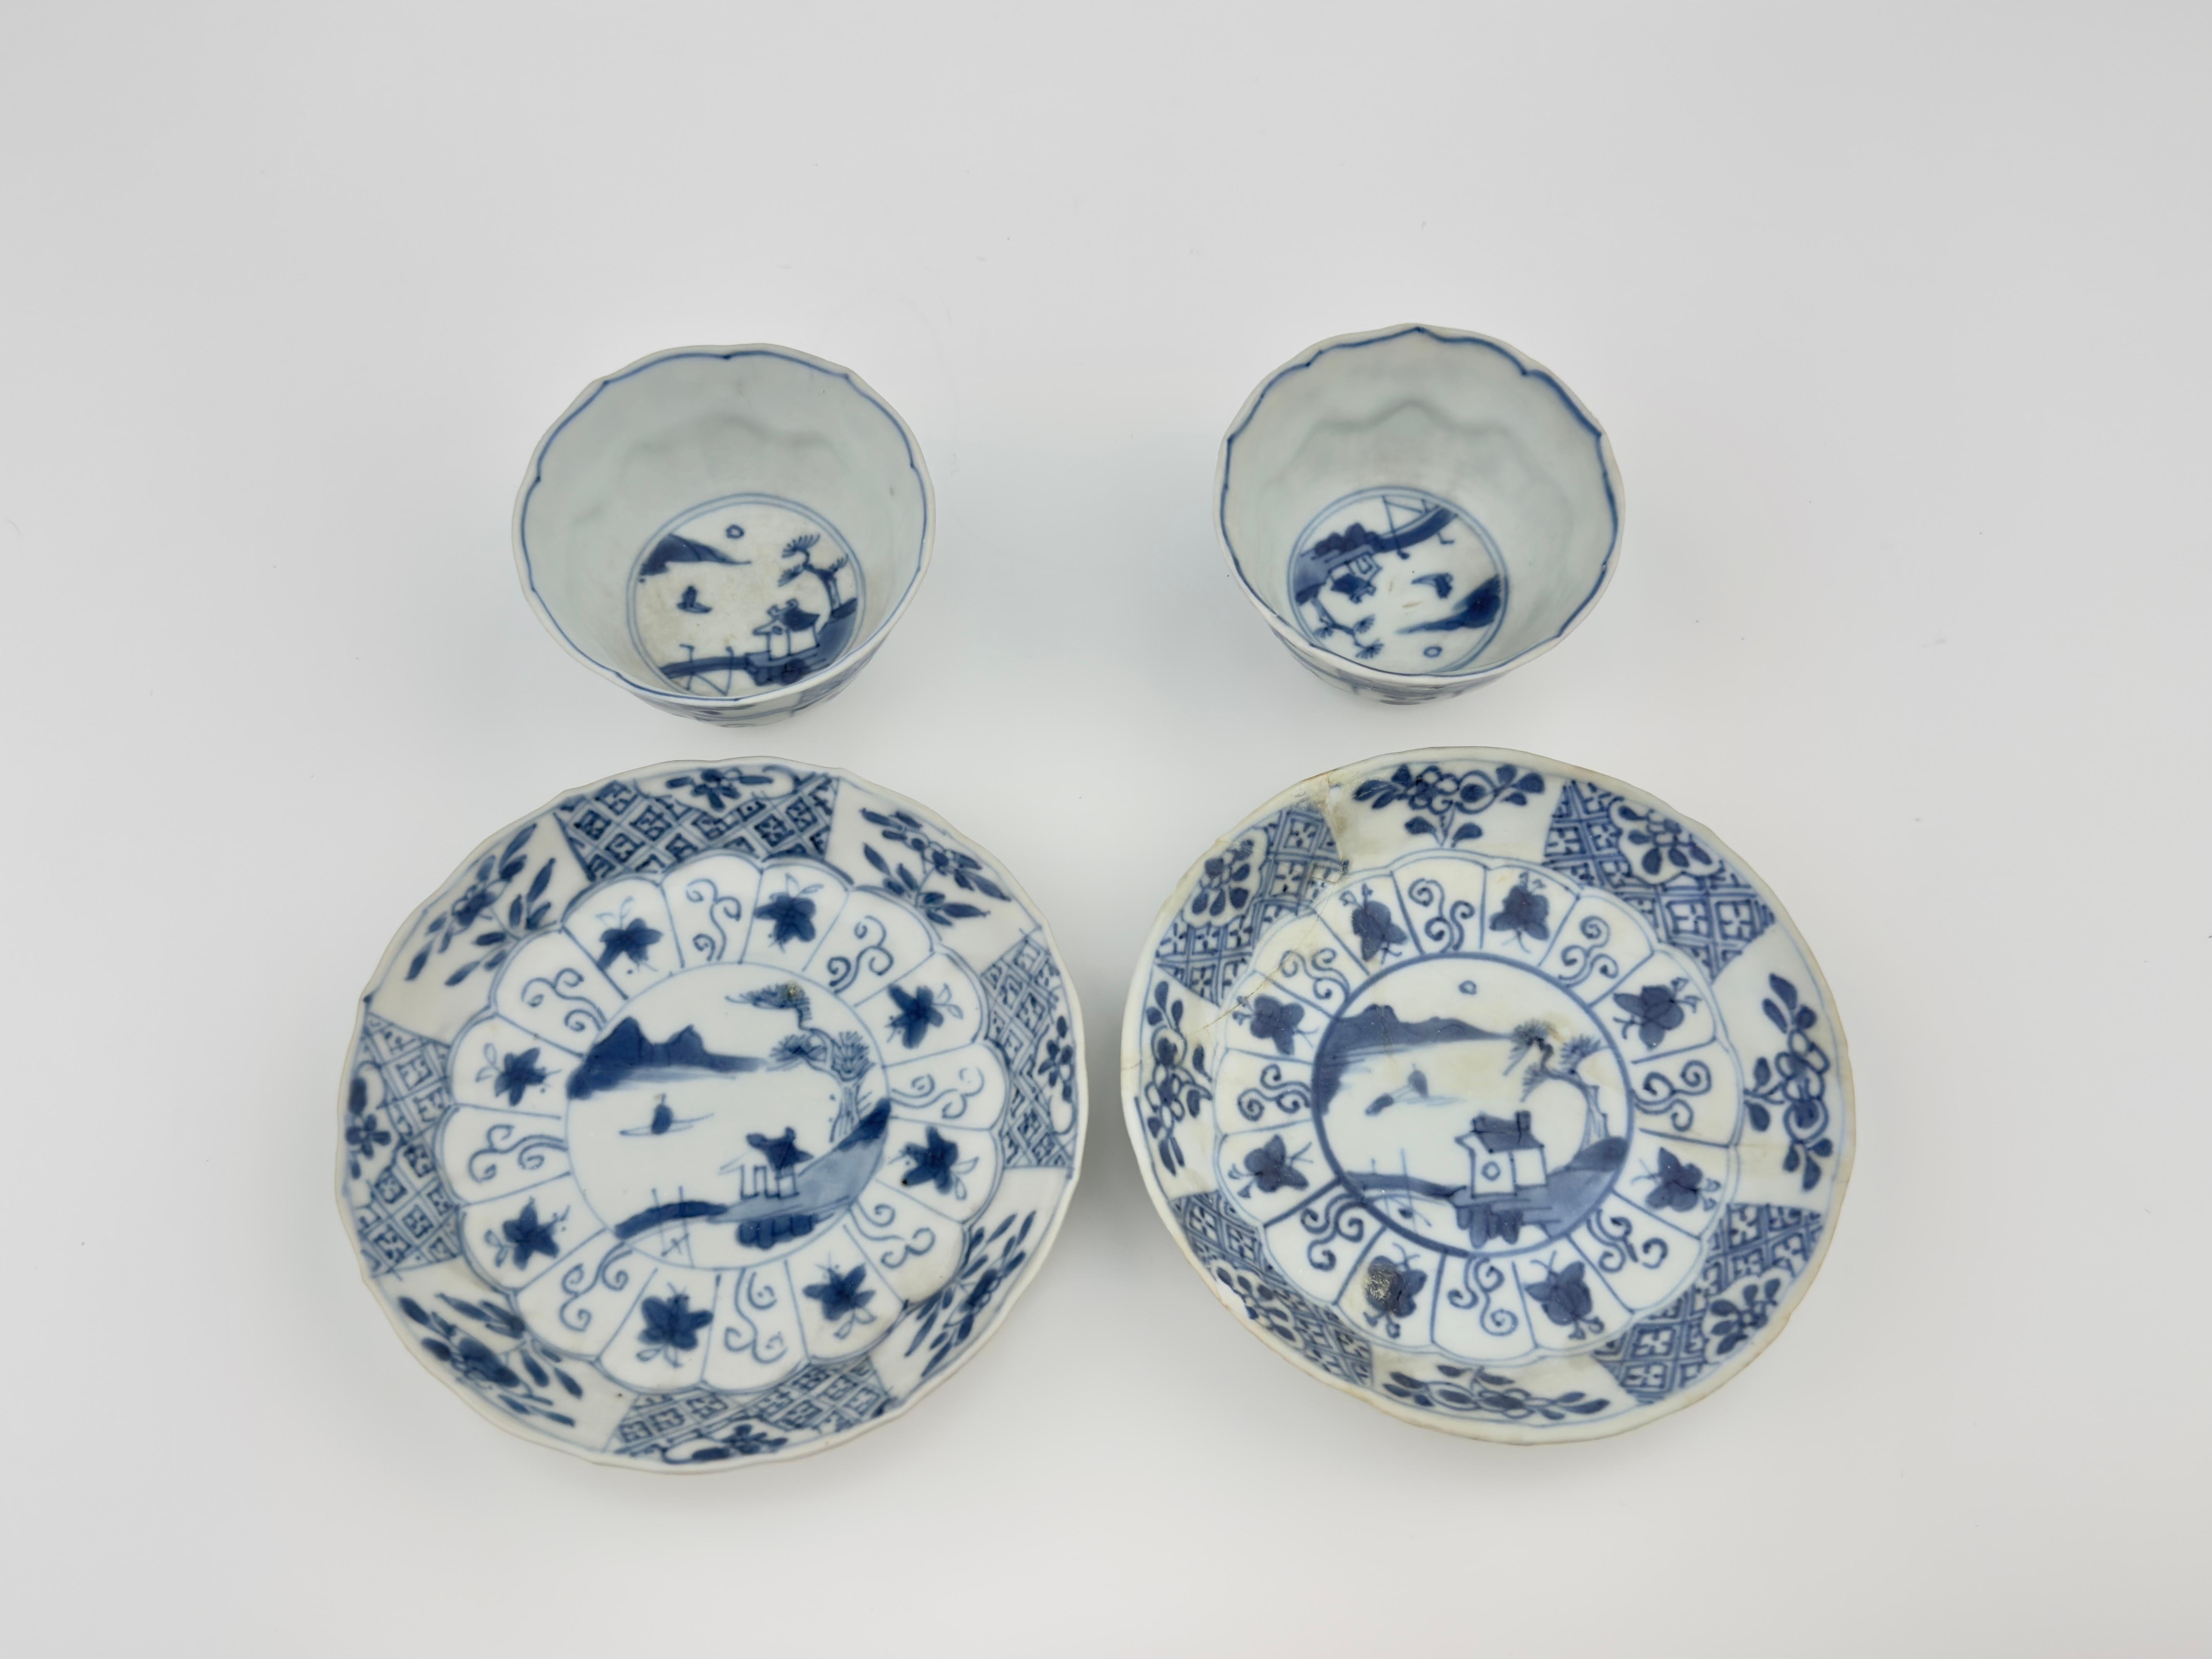 Blue and white tea set c 1725, Qing dynasty, Yongzheng reign For Sale 6